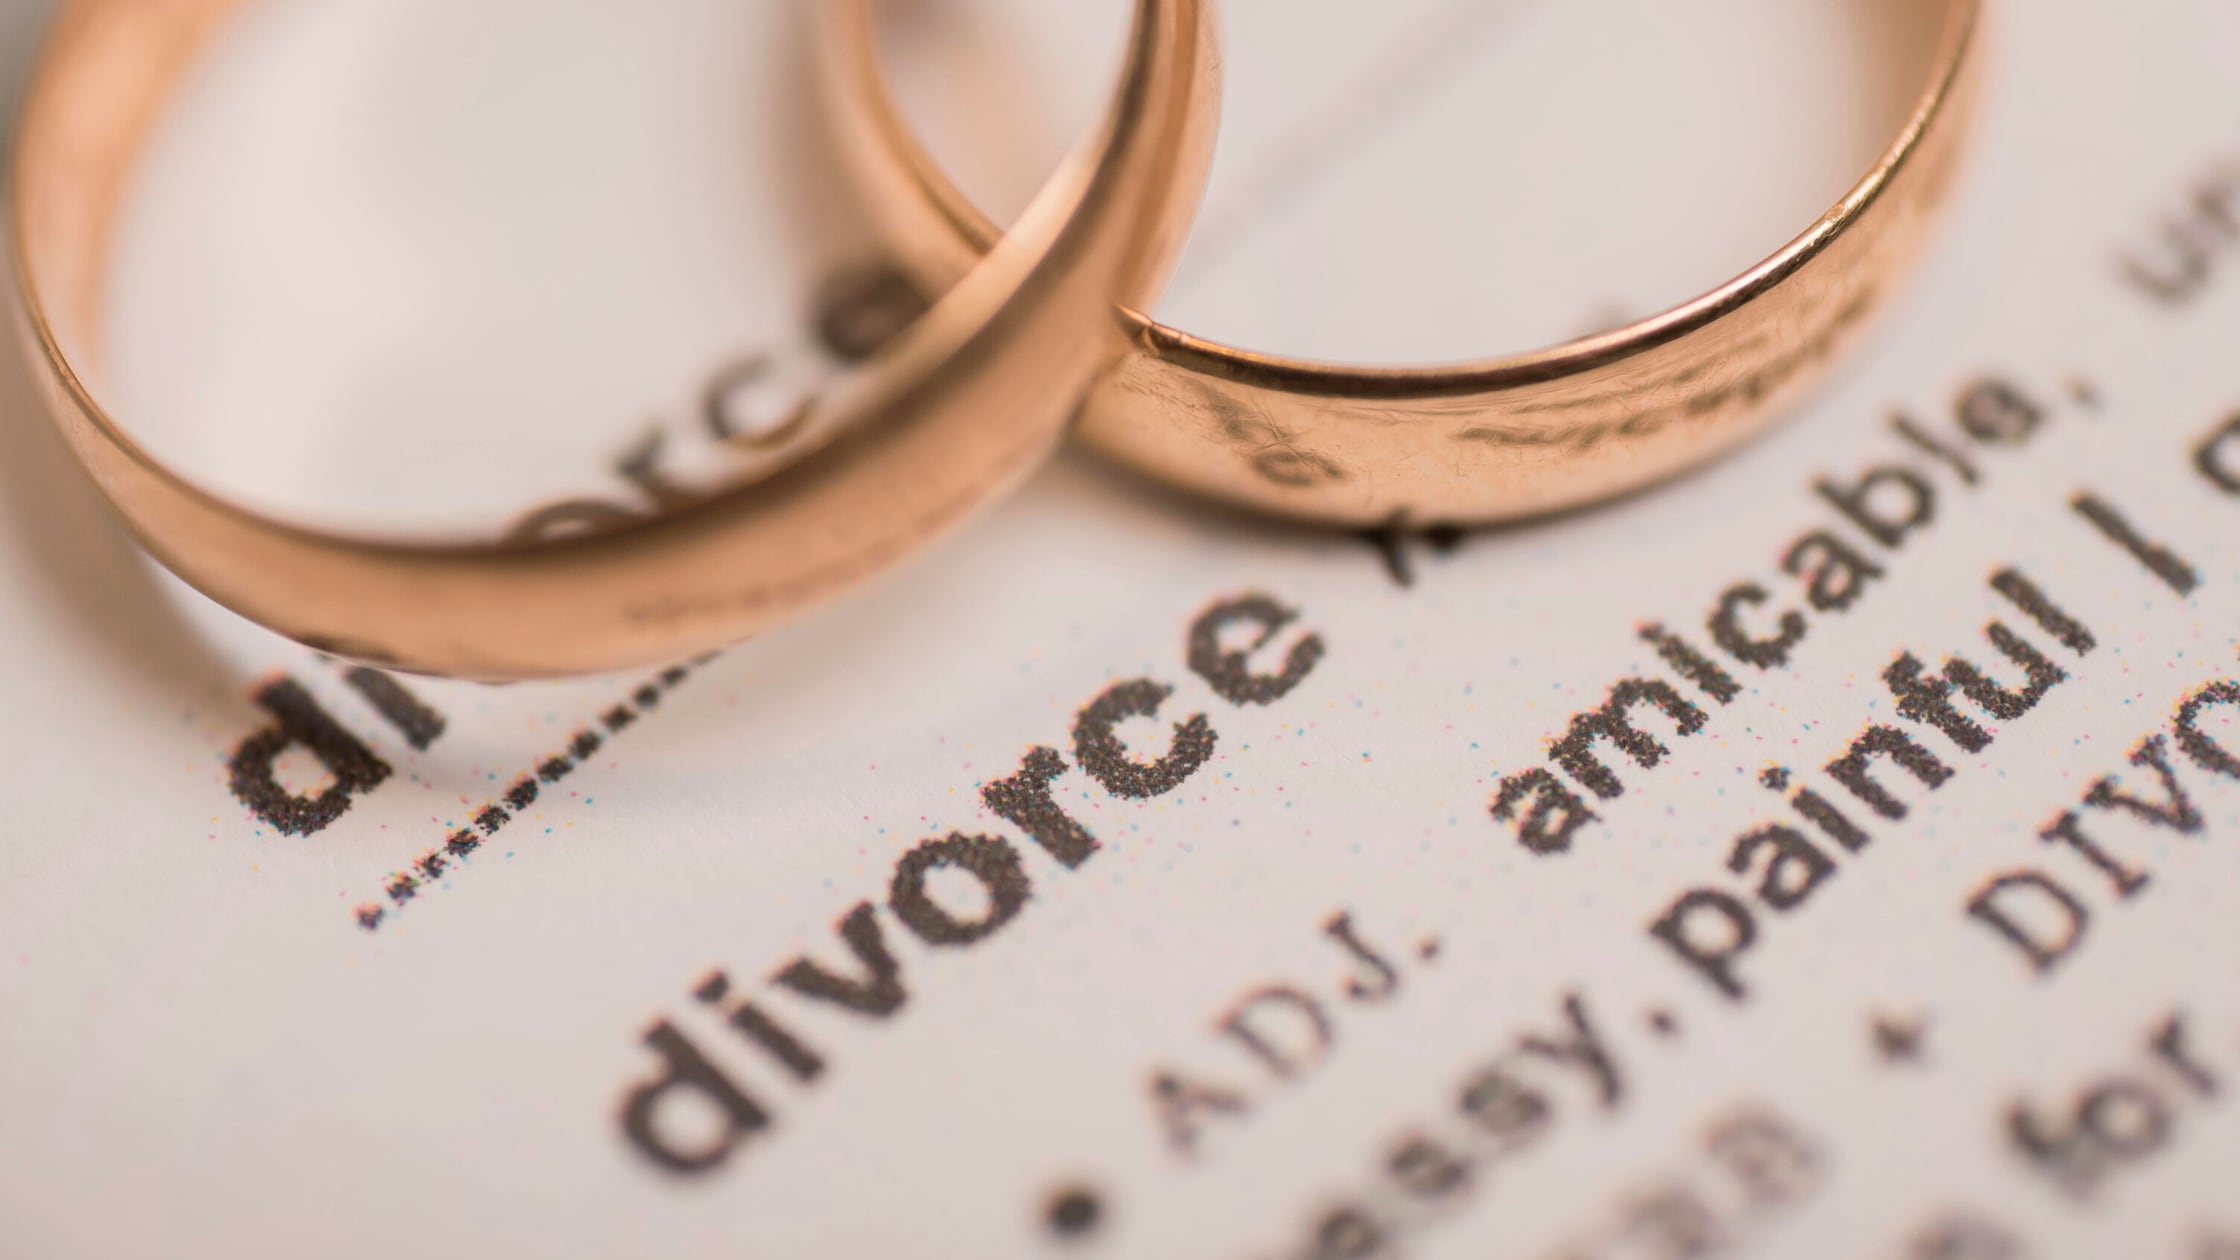 Mexico registers the highest number of divorces in the last 10 years